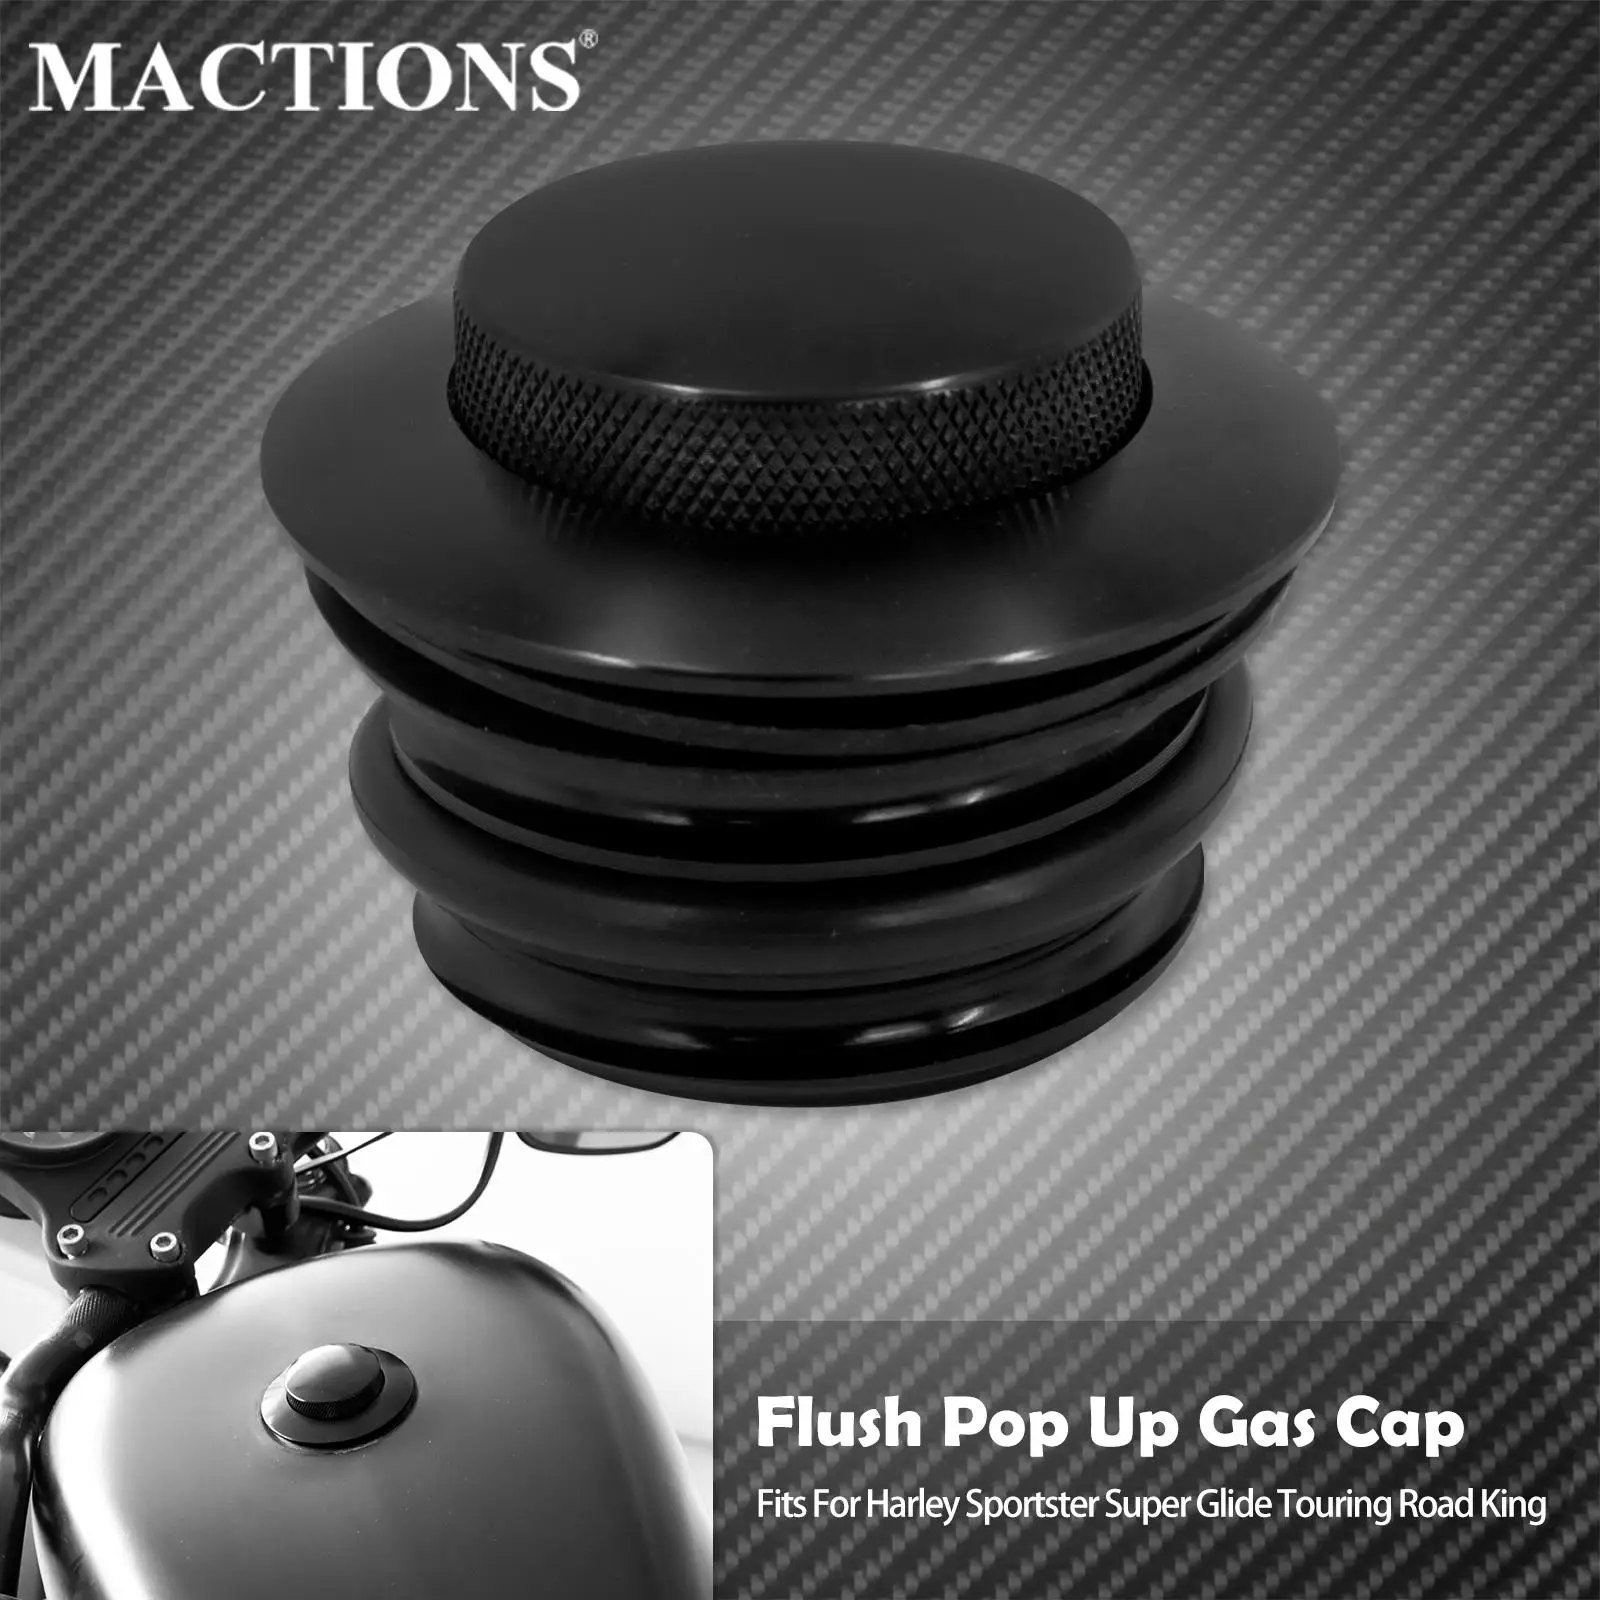 

Motorcycle Black Pop Up Fuel Tank Cap Right Hand Thread Reservoir Gas Cap For Harley Dyna Softail Fatboy Touring Sportster XL883